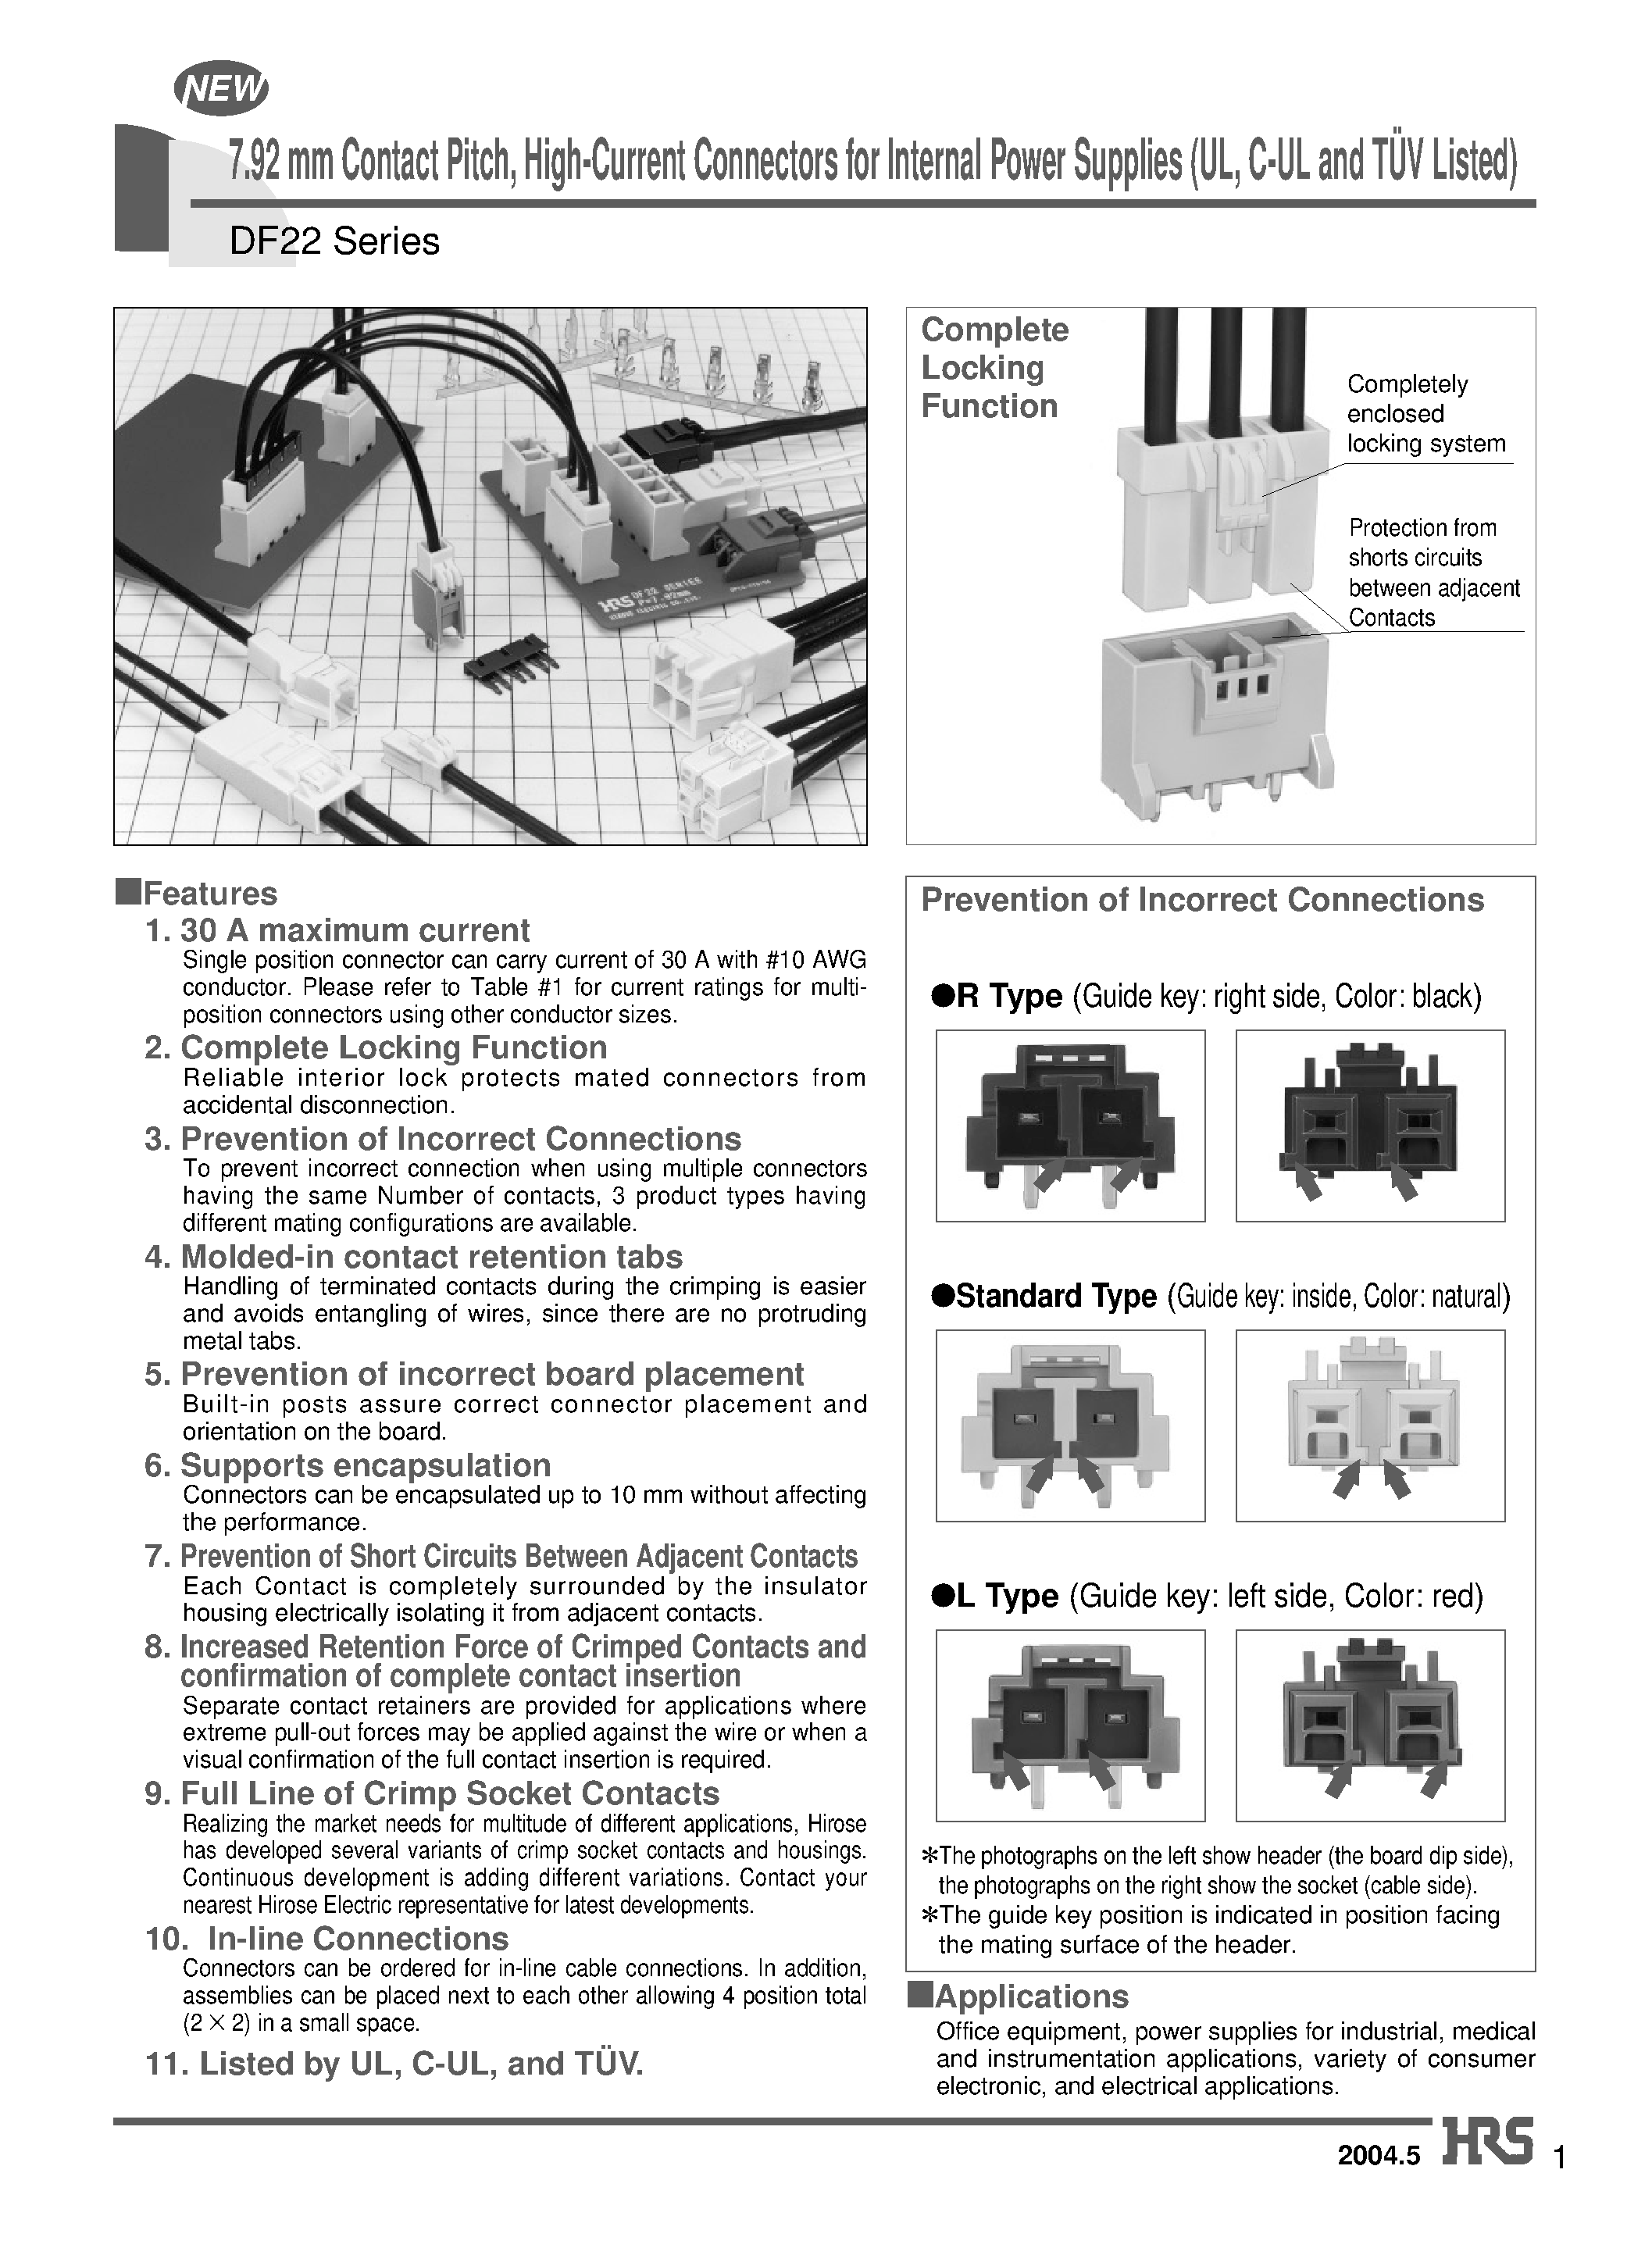 Datasheet DF22A-3DEP-7.92DSA - 7.92 mm Contact Pitch/ High-Current Connectors for Internal Power Supplies (UL/ C-UL and TUV Listed) page 1